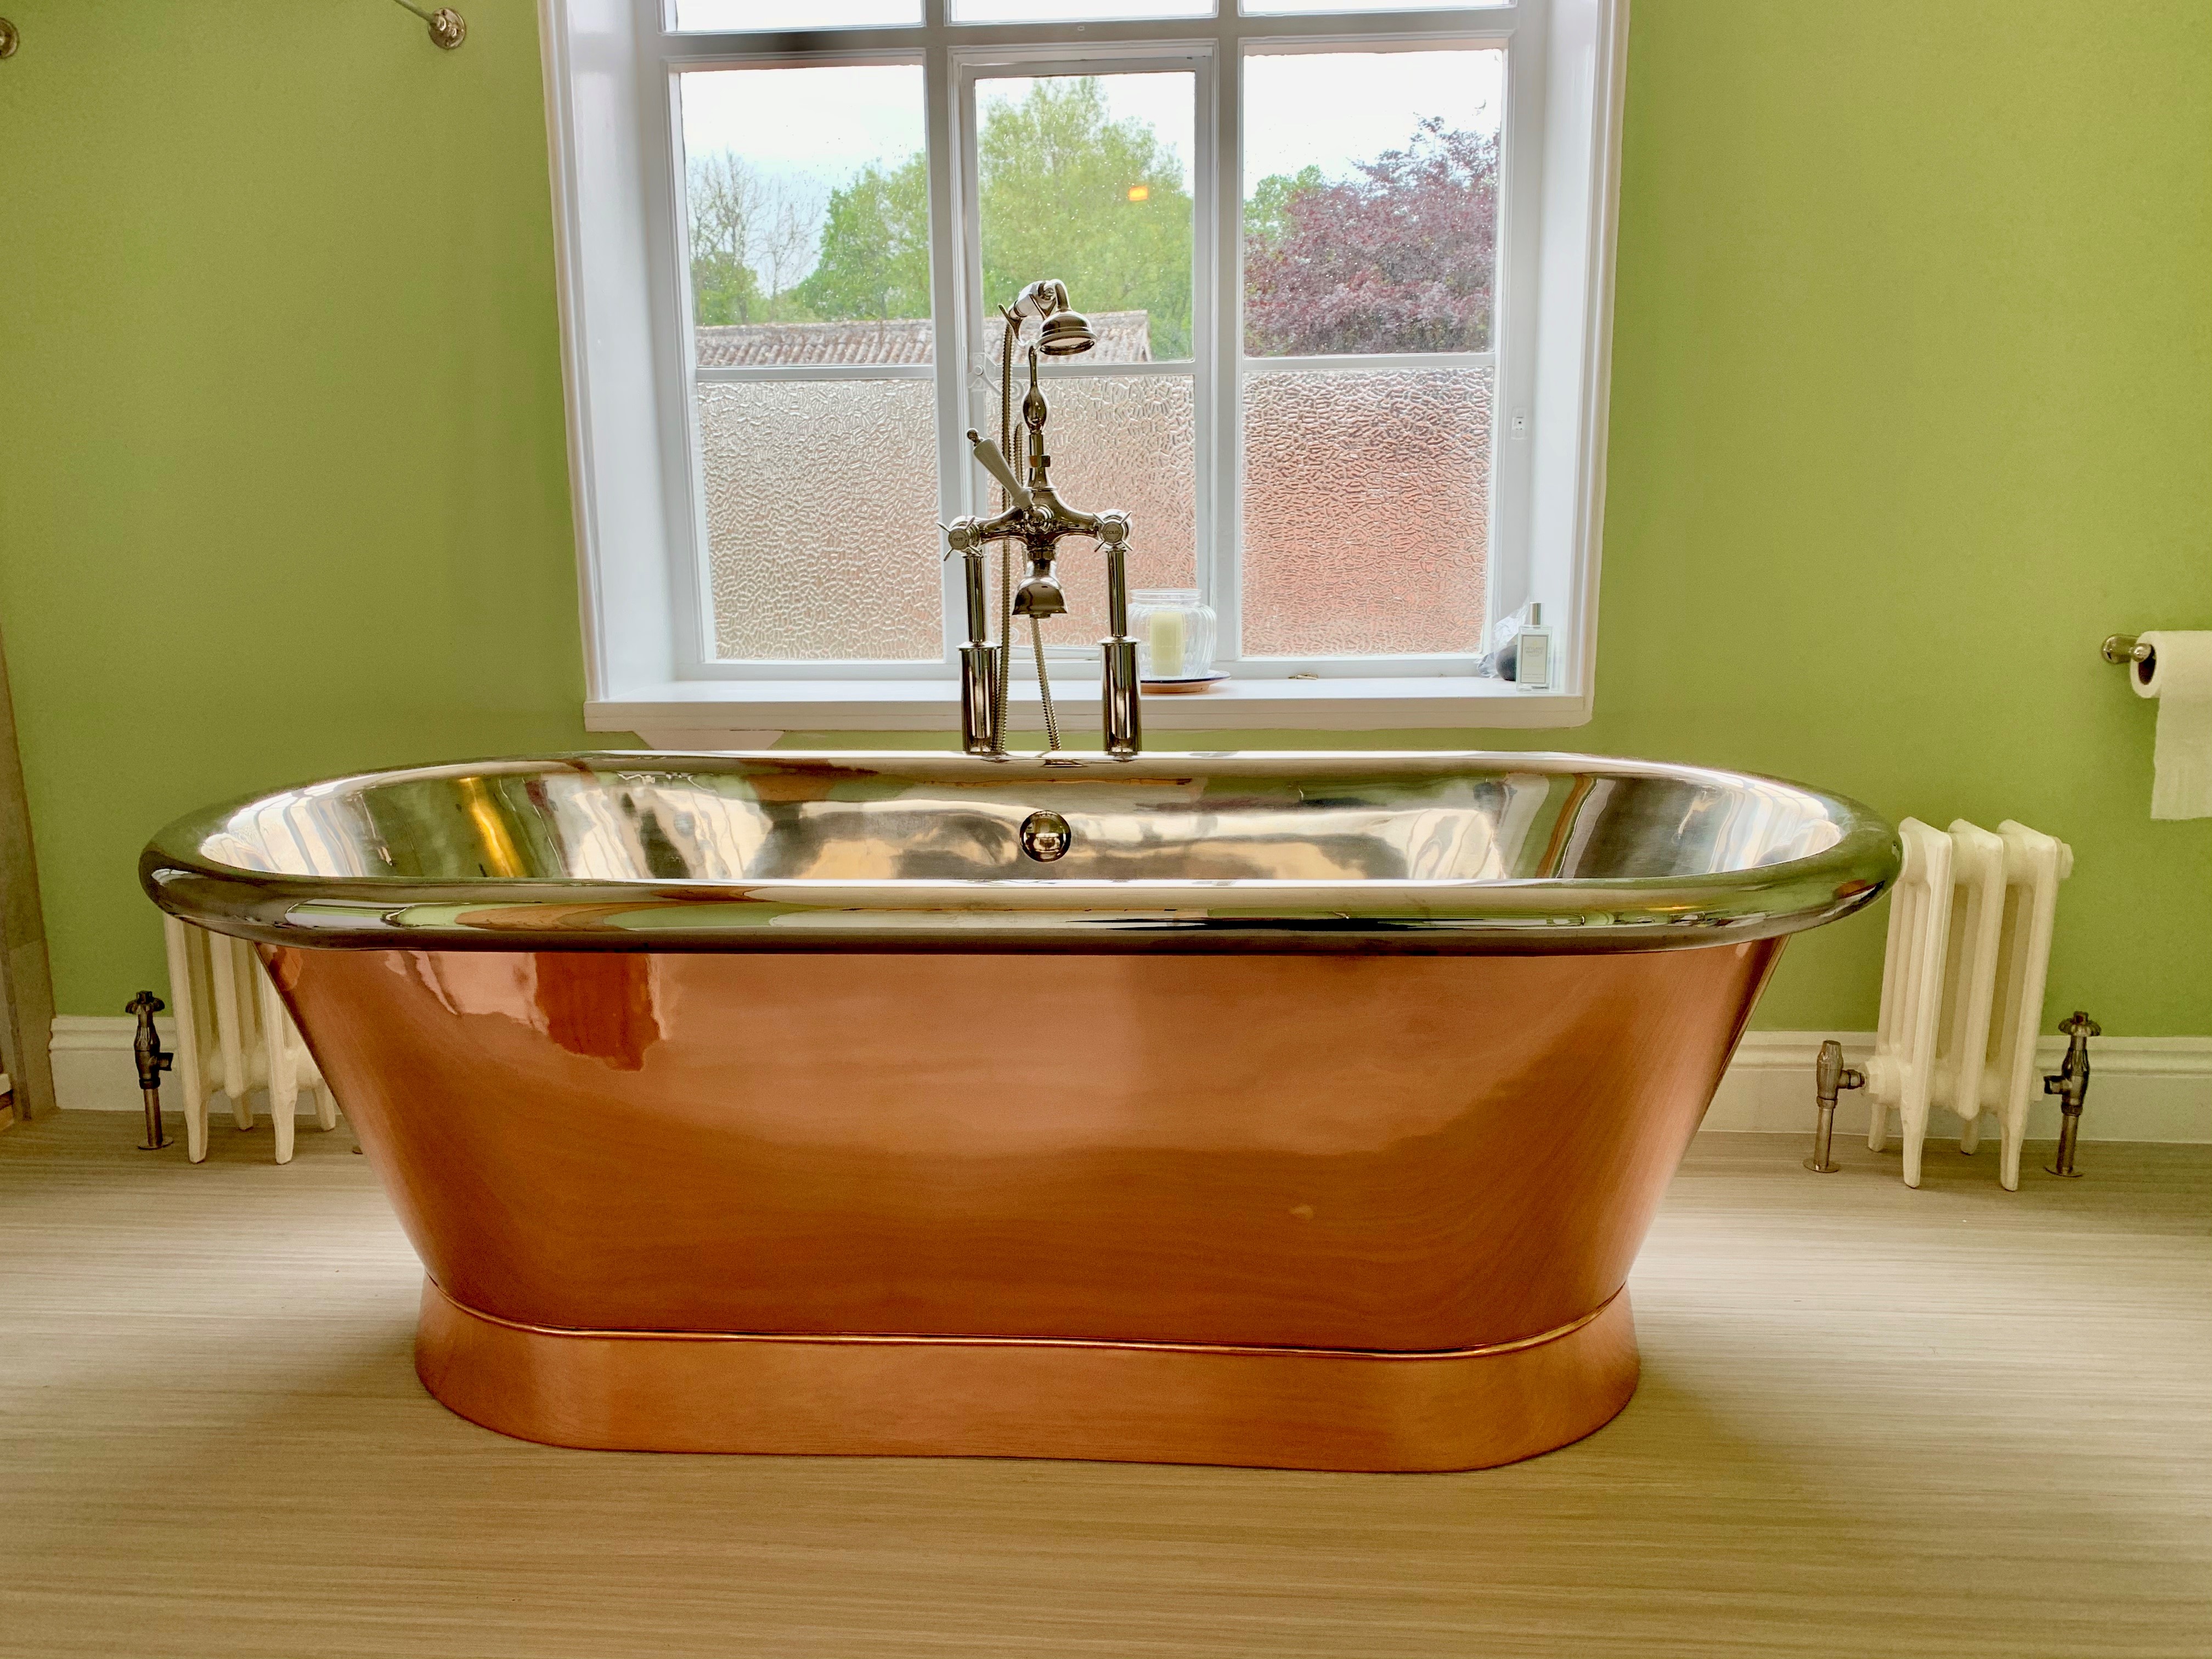 Photo Competion Winner, featuring Jig Normandy Copper Bath